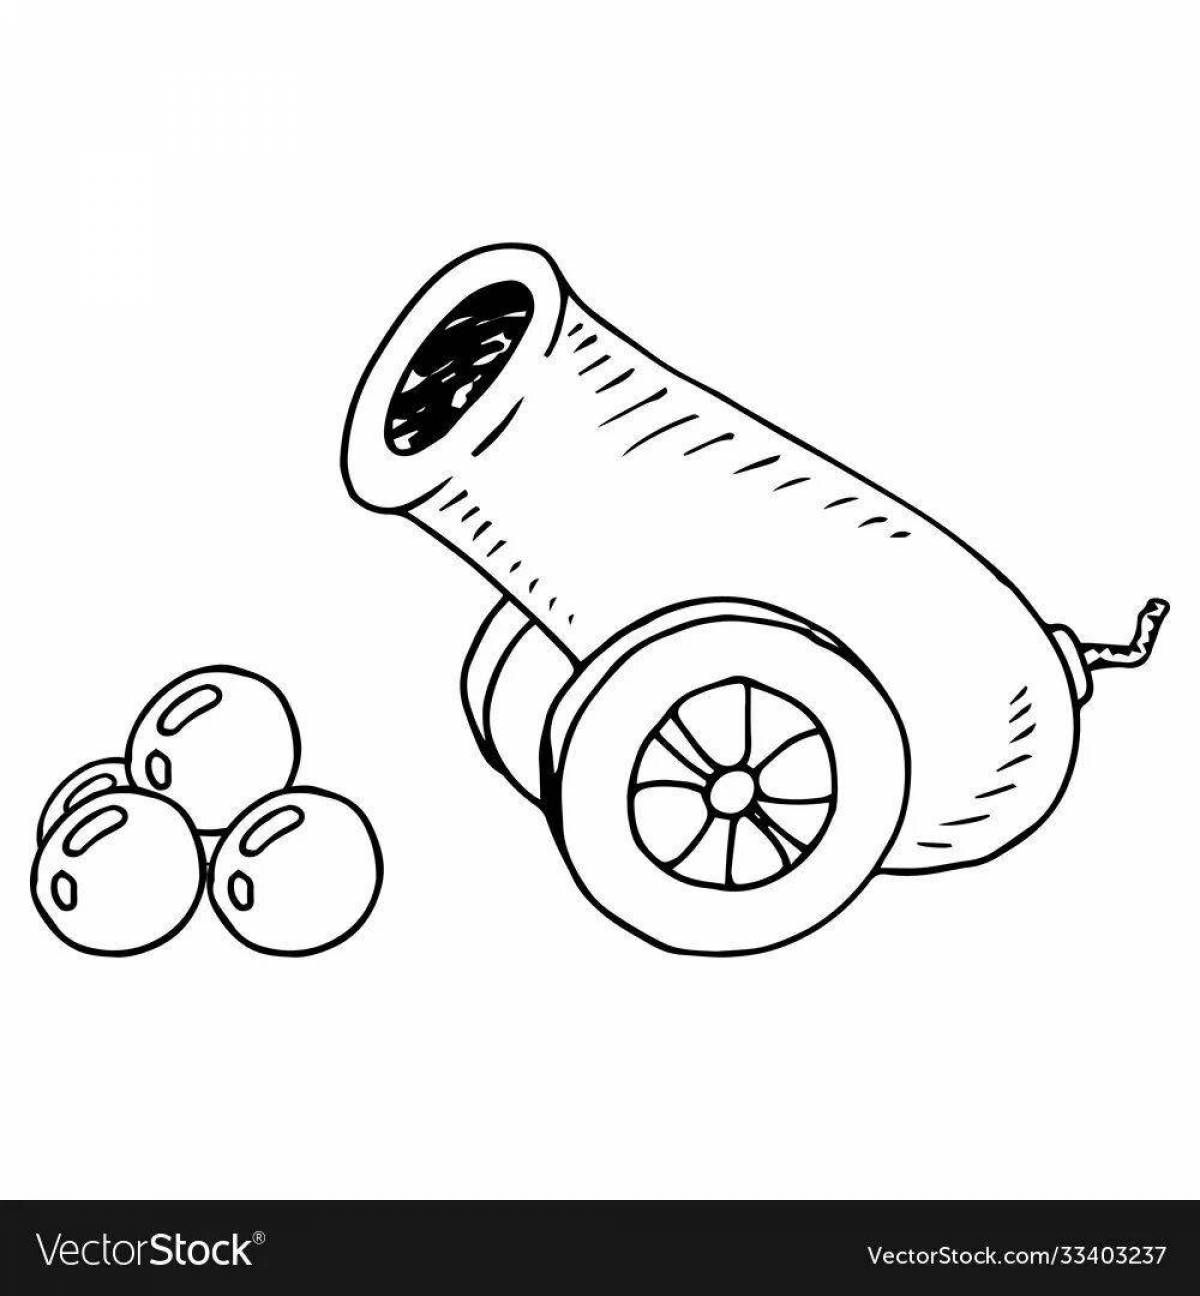 Coloring page elegant tsar cannon